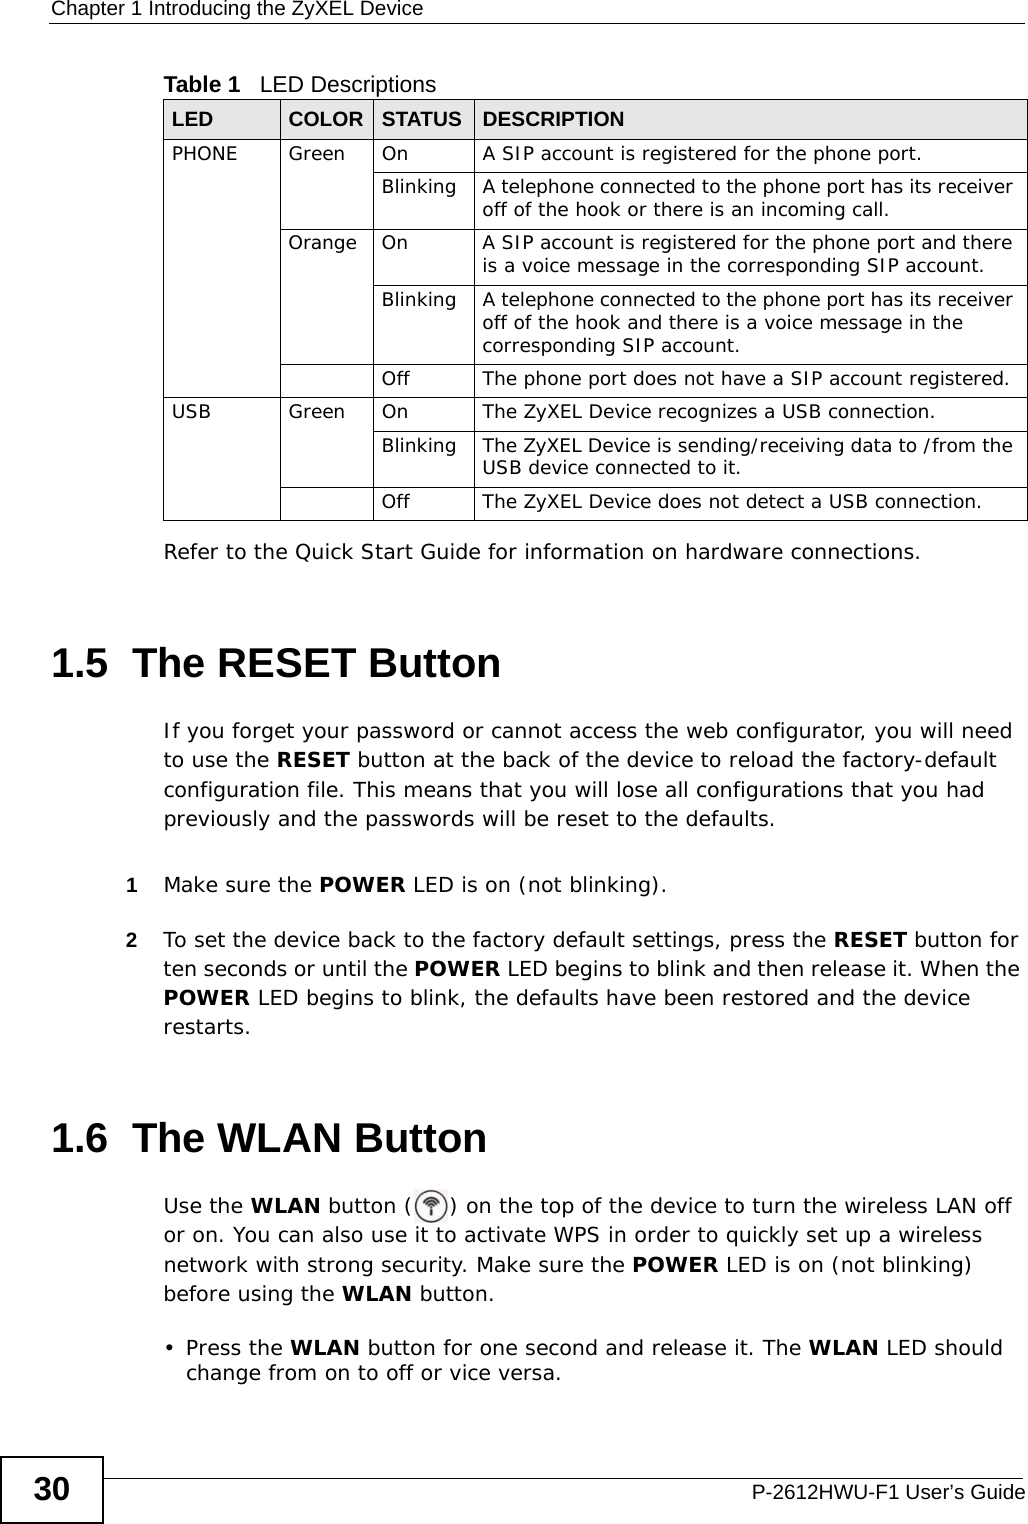 Chapter 1 Introducing the ZyXEL DeviceP-2612HWU-F1 User’s Guide30Refer to the Quick Start Guide for information on hardware connections. 1.5  The RESET ButtonIf you forget your password or cannot access the web configurator, you will need to use the RESET button at the back of the device to reload the factory-default configuration file. This means that you will lose all configurations that you had previously and the passwords will be reset to the defaults. 1Make sure the POWER LED is on (not blinking).2To set the device back to the factory default settings, press the RESET button for ten seconds or until the POWER LED begins to blink and then release it. When the POWER LED begins to blink, the defaults have been restored and the device restarts.1.6  The WLAN ButtonUse the WLAN button ( ) on the top of the device to turn the wireless LAN off or on. You can also use it to activate WPS in order to quickly set up a wireless network with strong security. Make sure the POWER LED is on (not blinking) before using the WLAN button.•Press the WLAN button for one second and release it. The WLAN LED should change from on to off or vice versa.PHONE  Green On A SIP account is registered for the phone port.Blinking A telephone connected to the phone port has its receiver off of the hook or there is an incoming call.Orange On A SIP account is registered for the phone port and there is a voice message in the corresponding SIP account.Blinking A telephone connected to the phone port has its receiver off of the hook and there is a voice message in the corresponding SIP account.Off The phone port does not have a SIP account registered.USB Green On The ZyXEL Device recognizes a USB connection.Blinking The ZyXEL Device is sending/receiving data to /from the USB device connected to it.Off The ZyXEL Device does not detect a USB connection.Table 1   LED DescriptionsLED COLOR STATUS DESCRIPTION